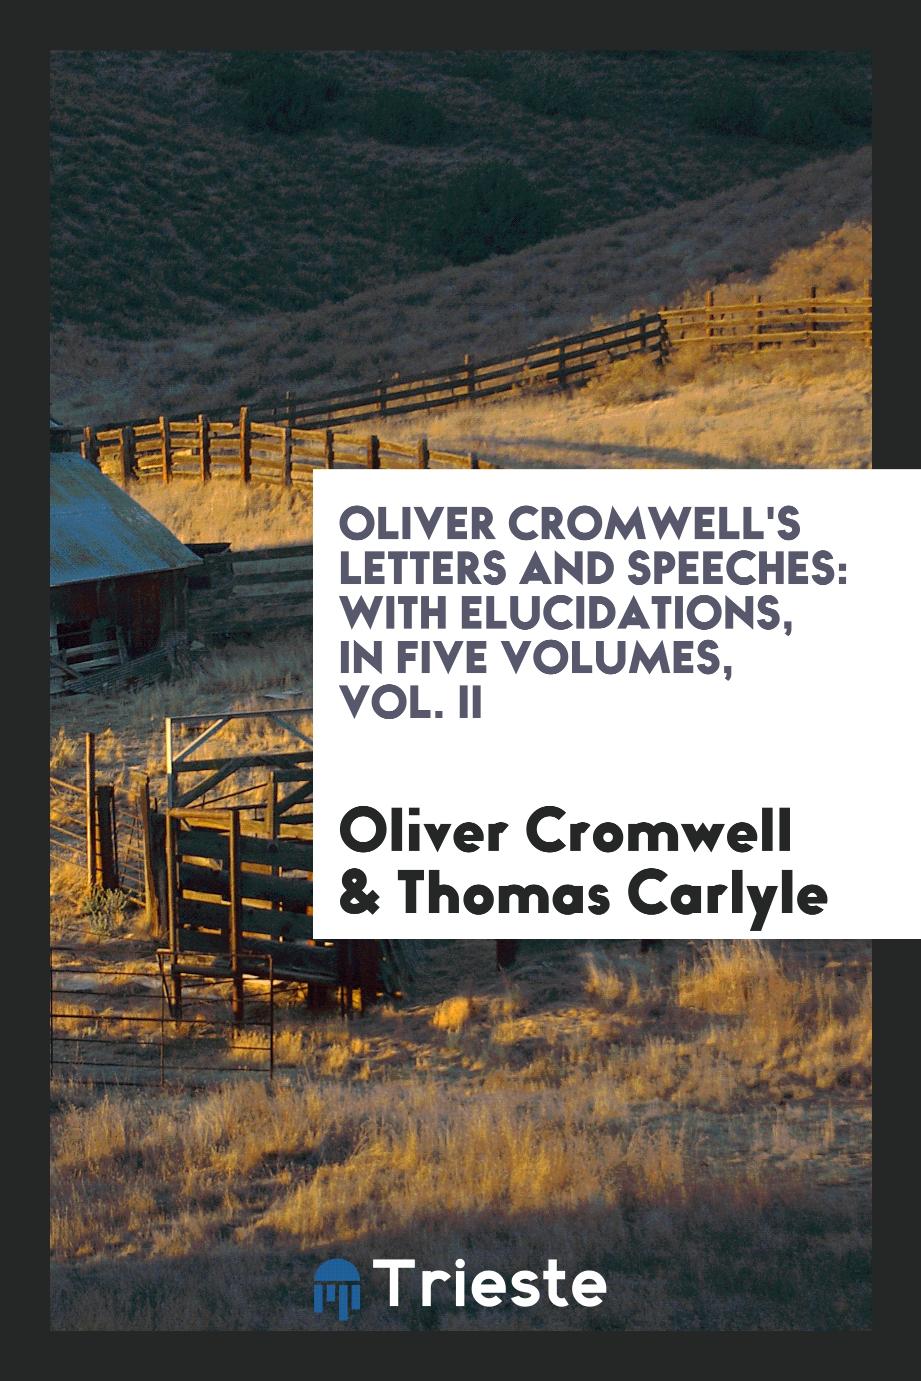 Oliver Cromwell's Letters and Speeches: With Elucidations, in Five Volumes, Vol. II